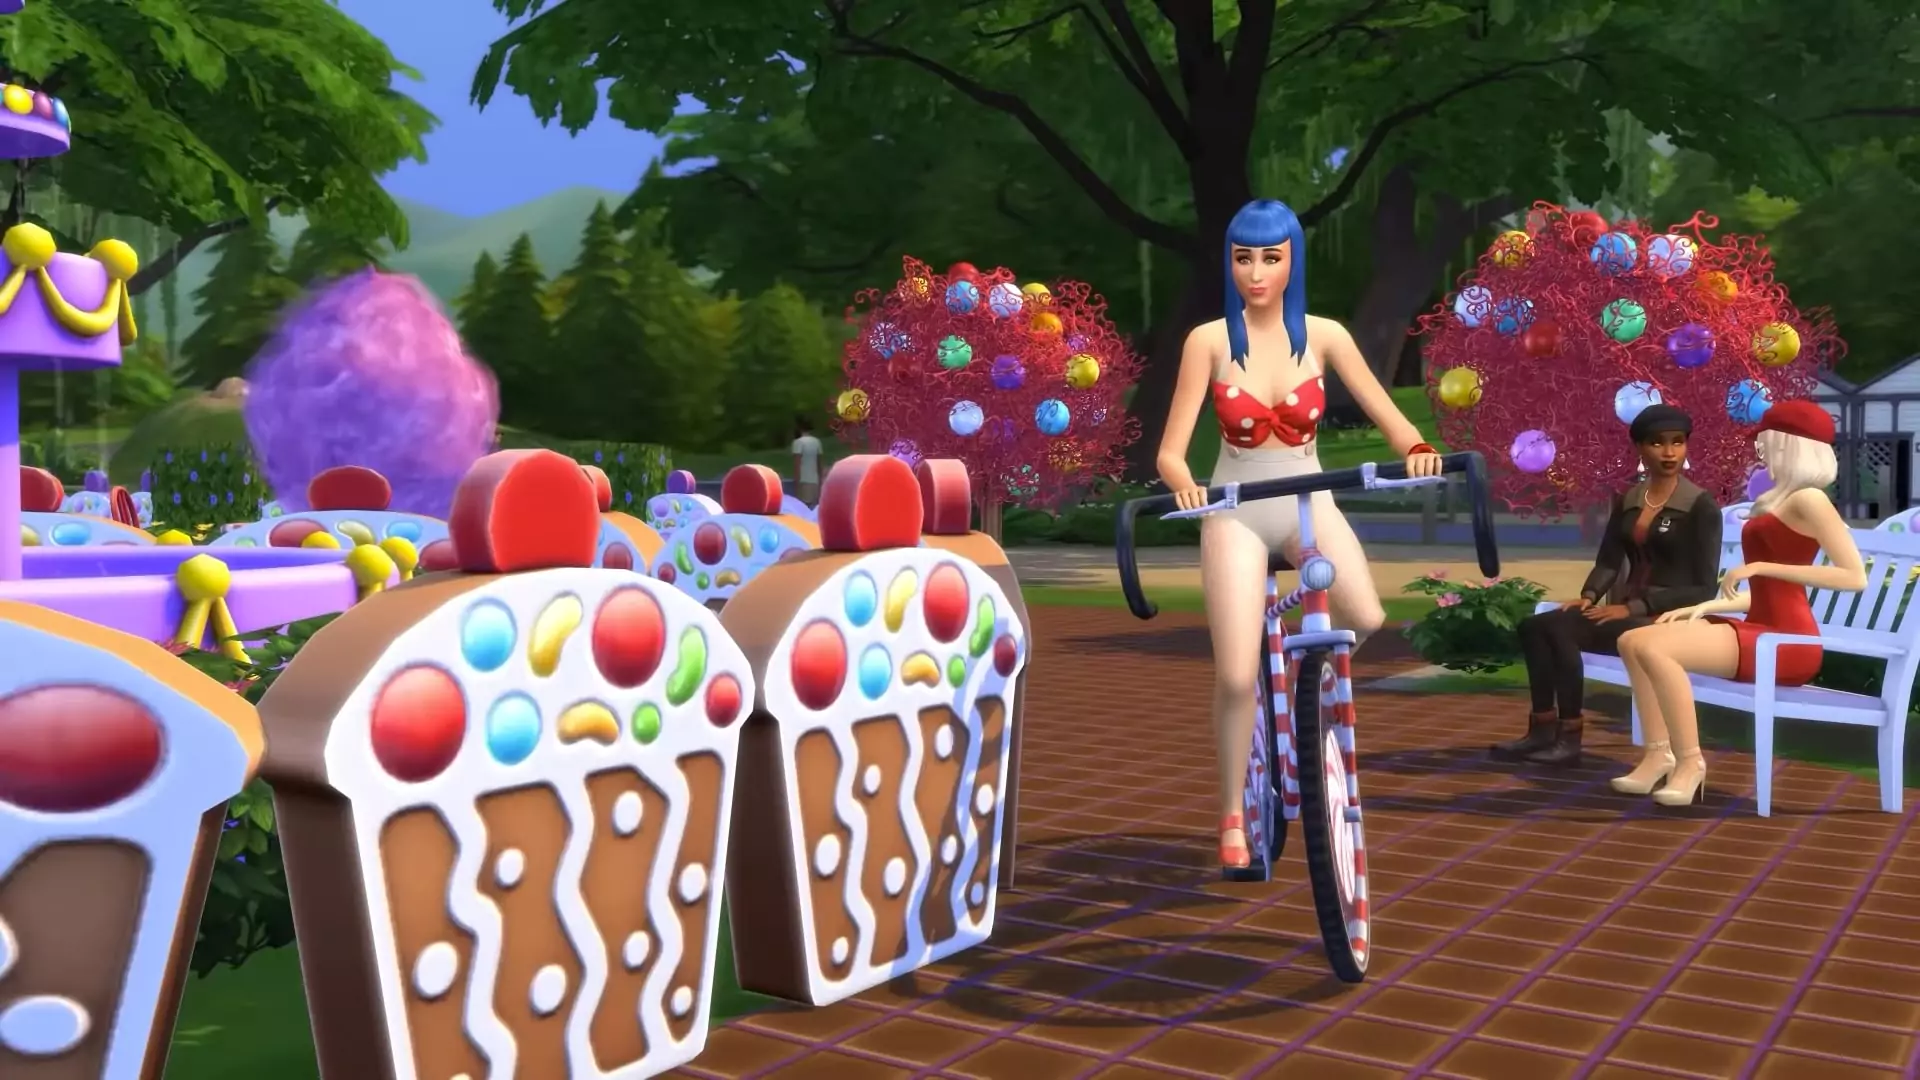 The Sims 4 Sweet Treats - Katy Perry Riding Bicycle near Cupcakes